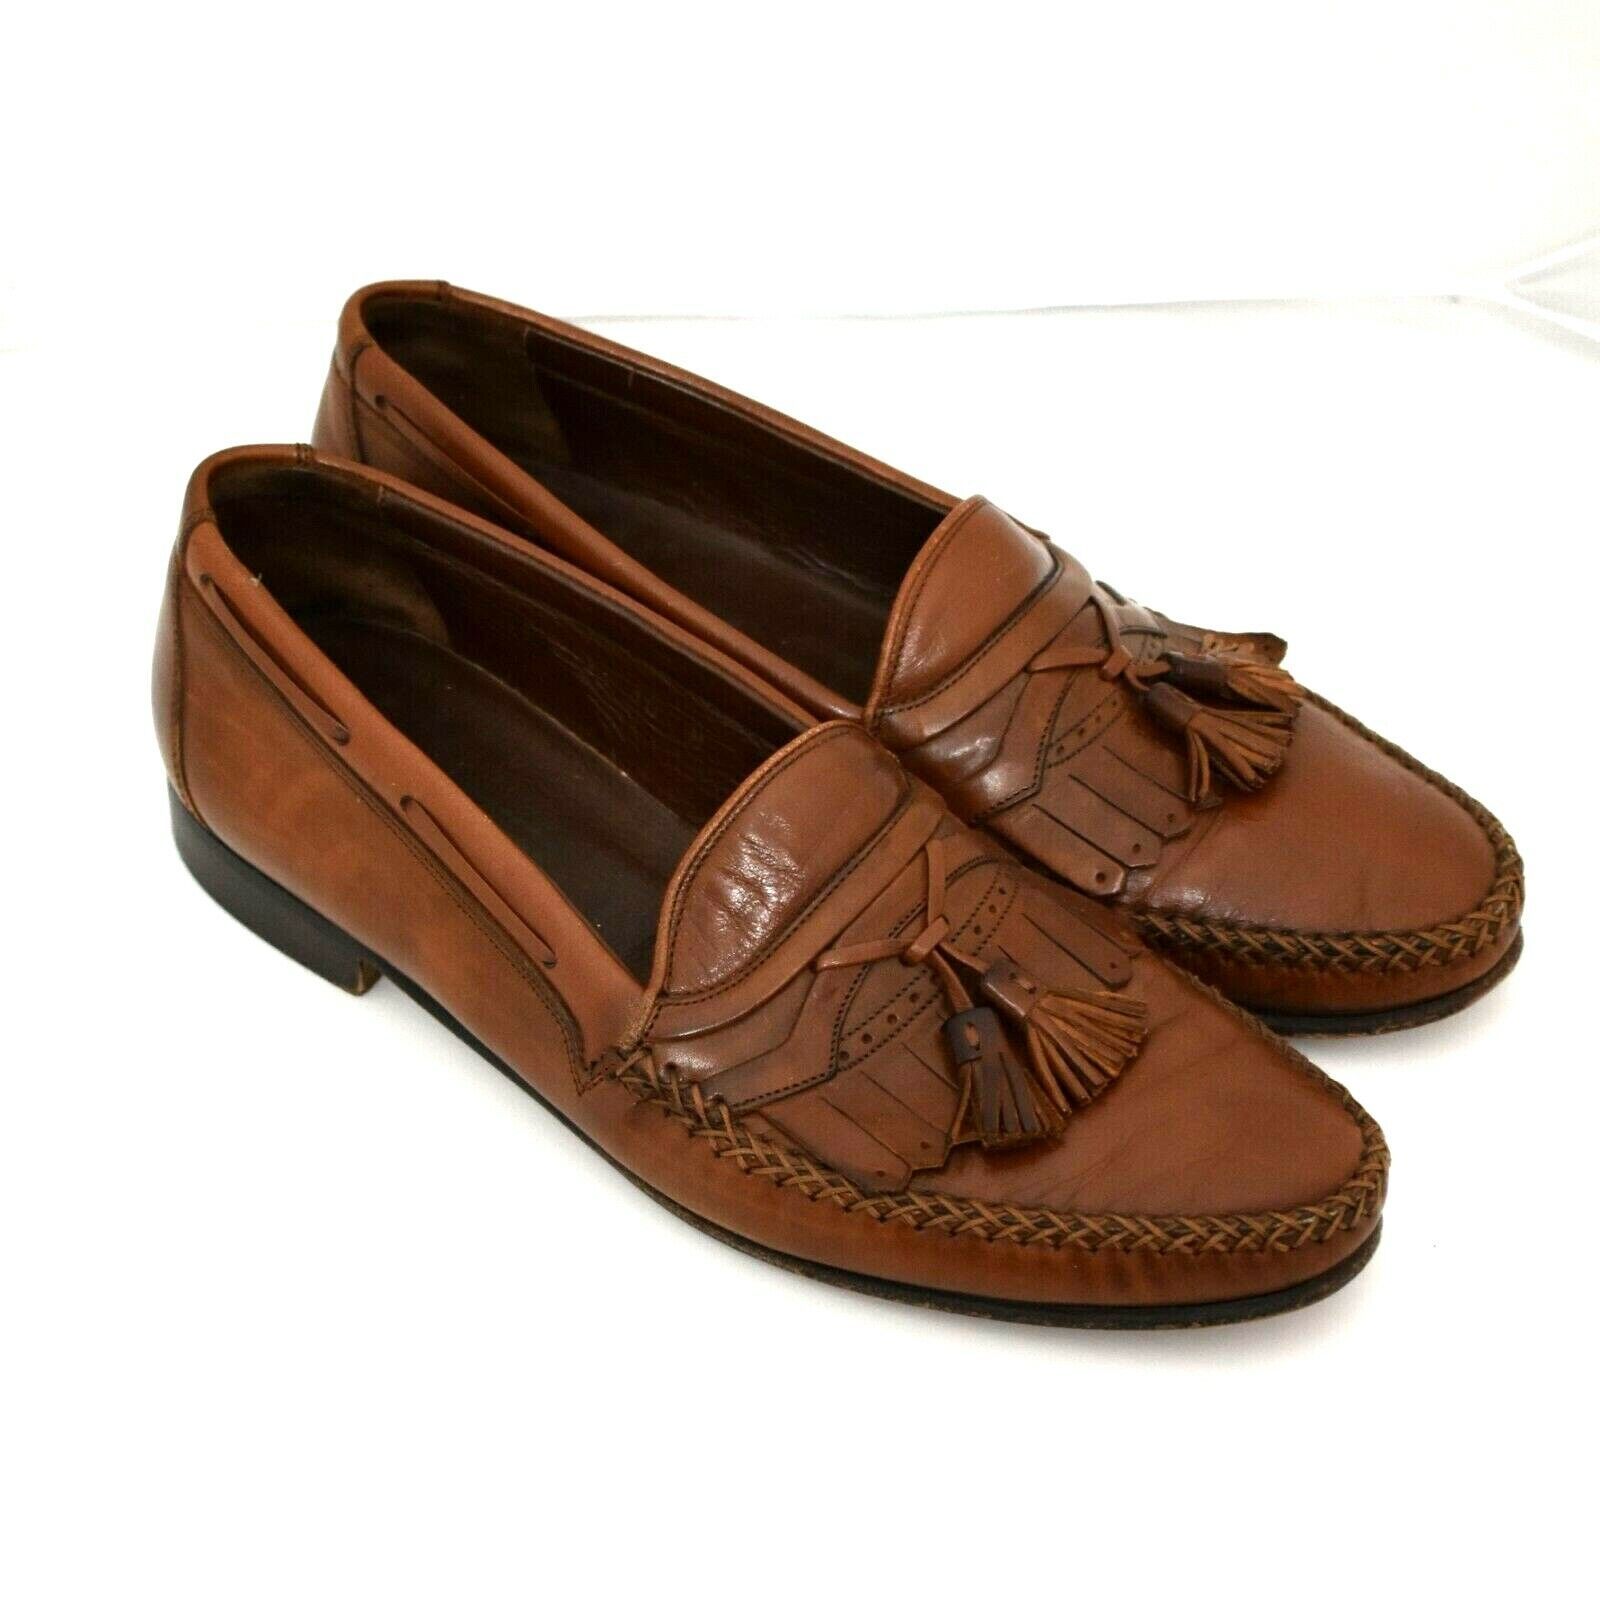 Primary image for Johnston and Murphy Brown Tassel Kiltie Loafer Mens 10N Brown Handcrafted #8134 